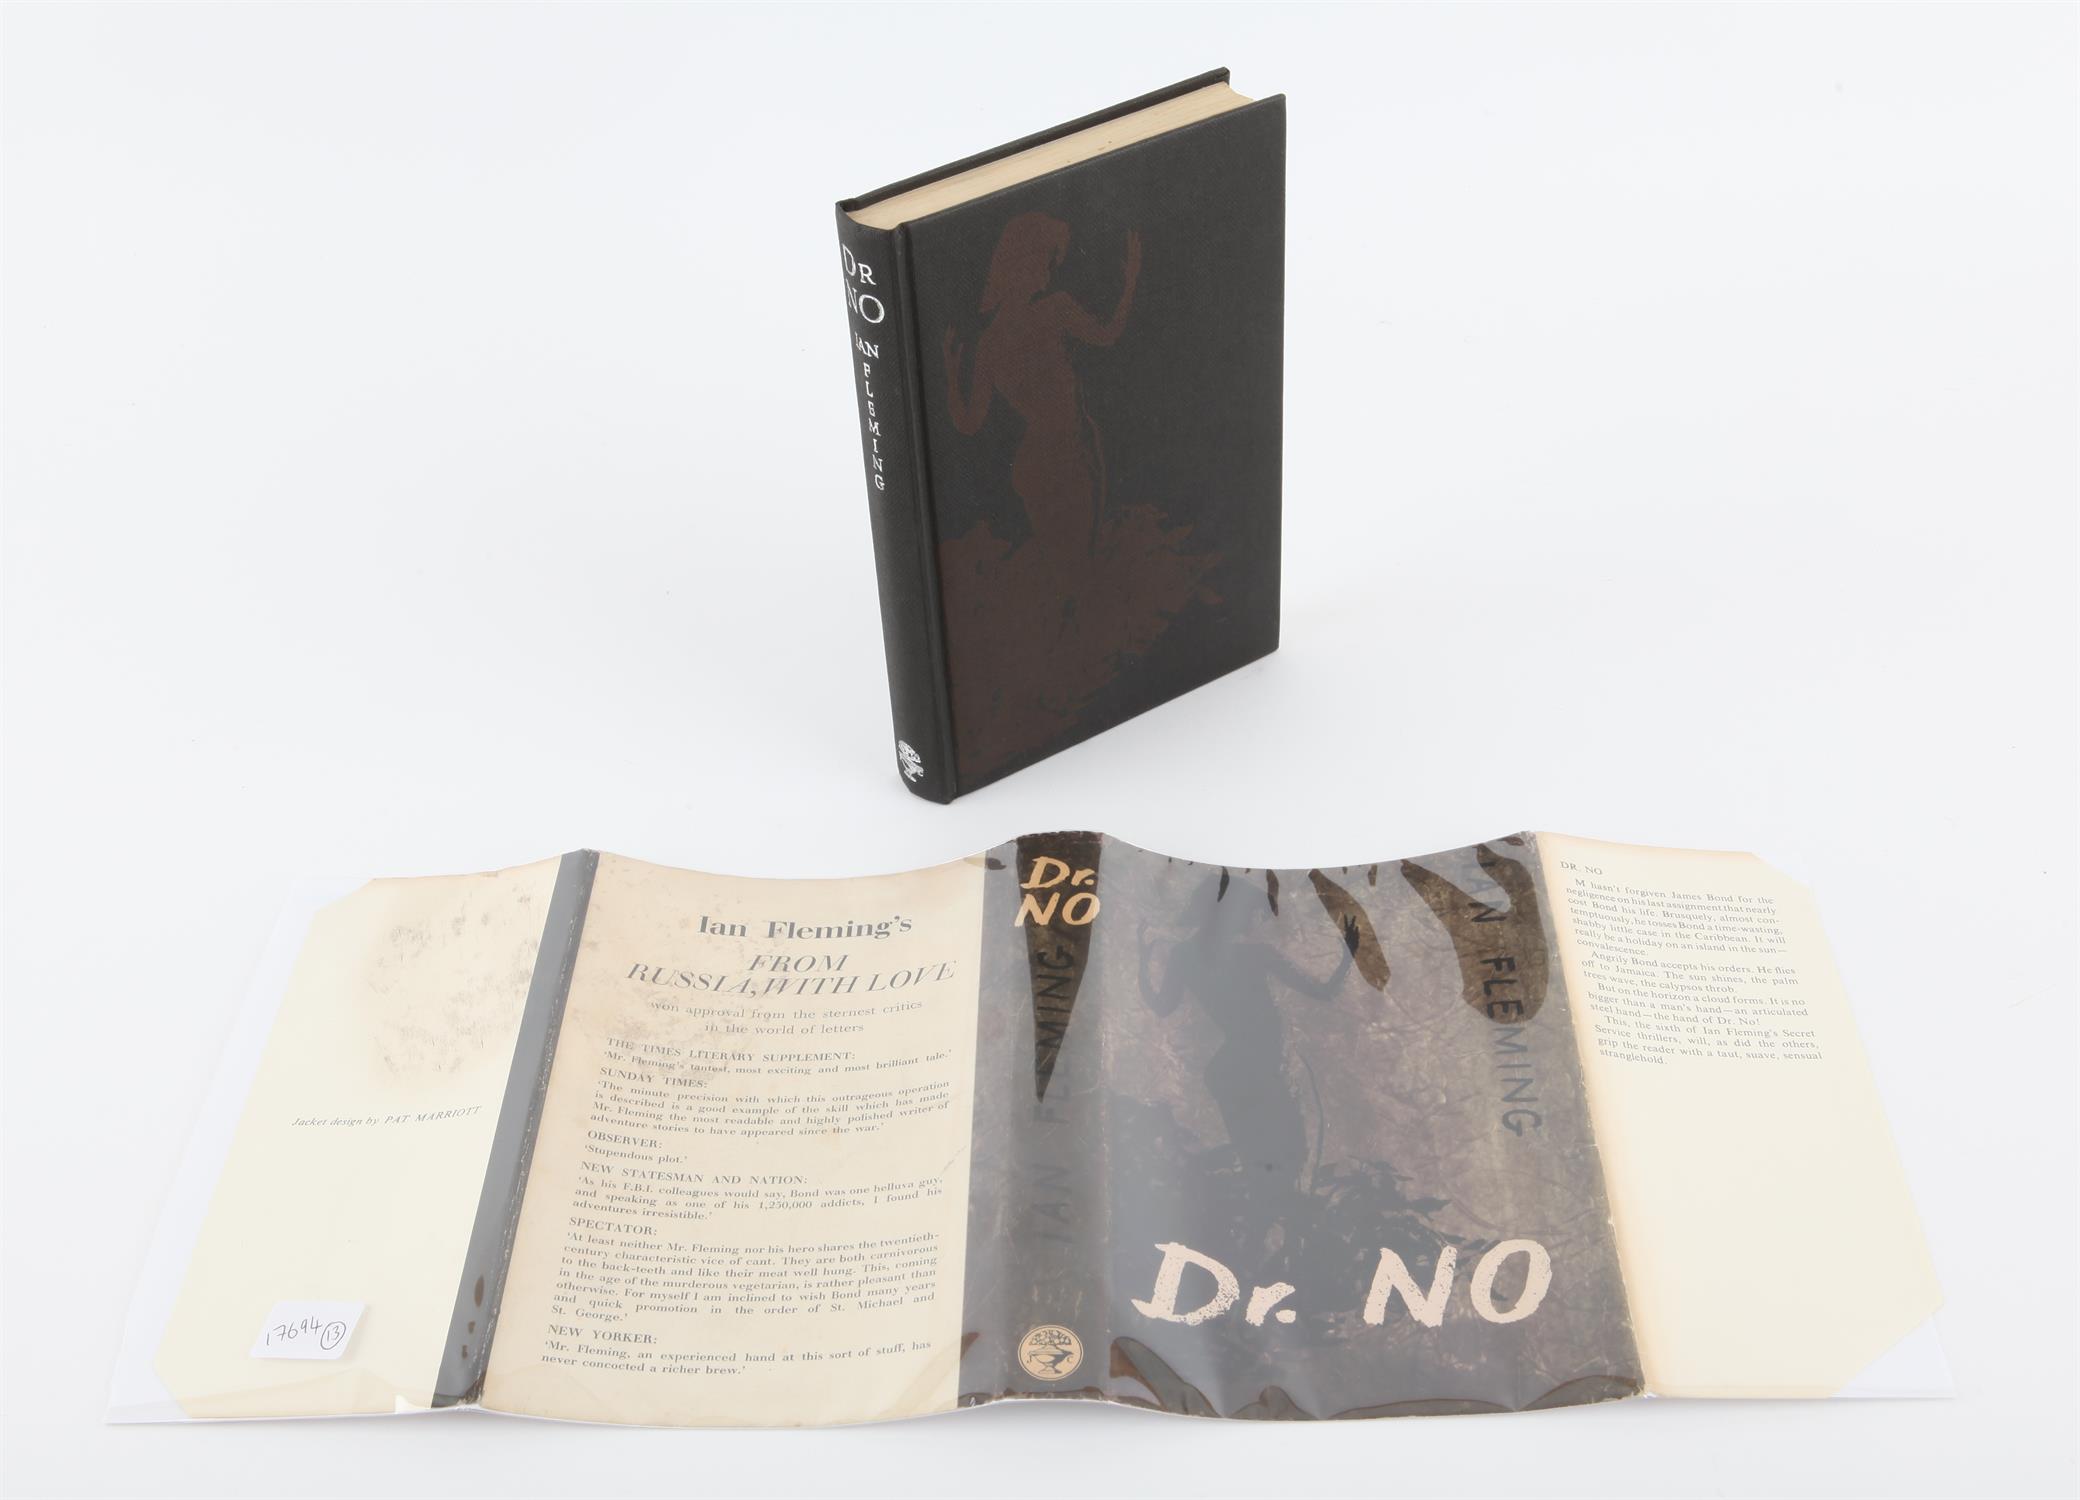 James Bond Dr. No - Ian Fleming Hardback First Edition book with dust jacket, published by Jonathan - Image 3 of 3